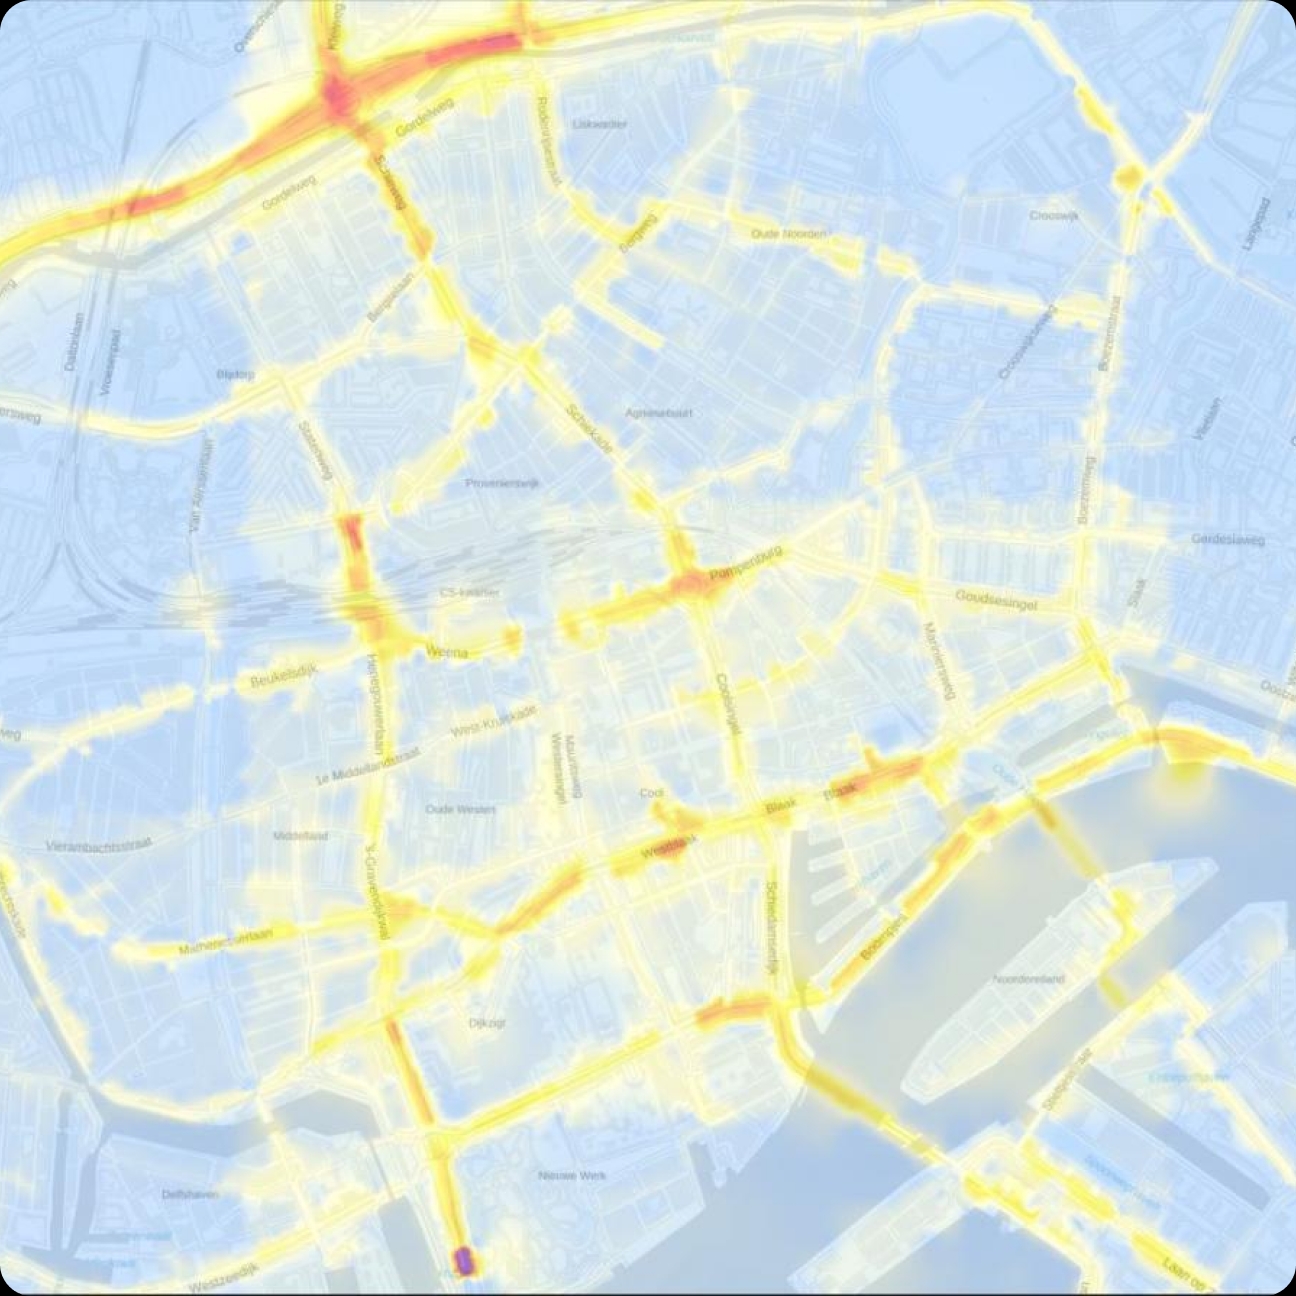 Luchtmeetnet screenshot of the map with pollution